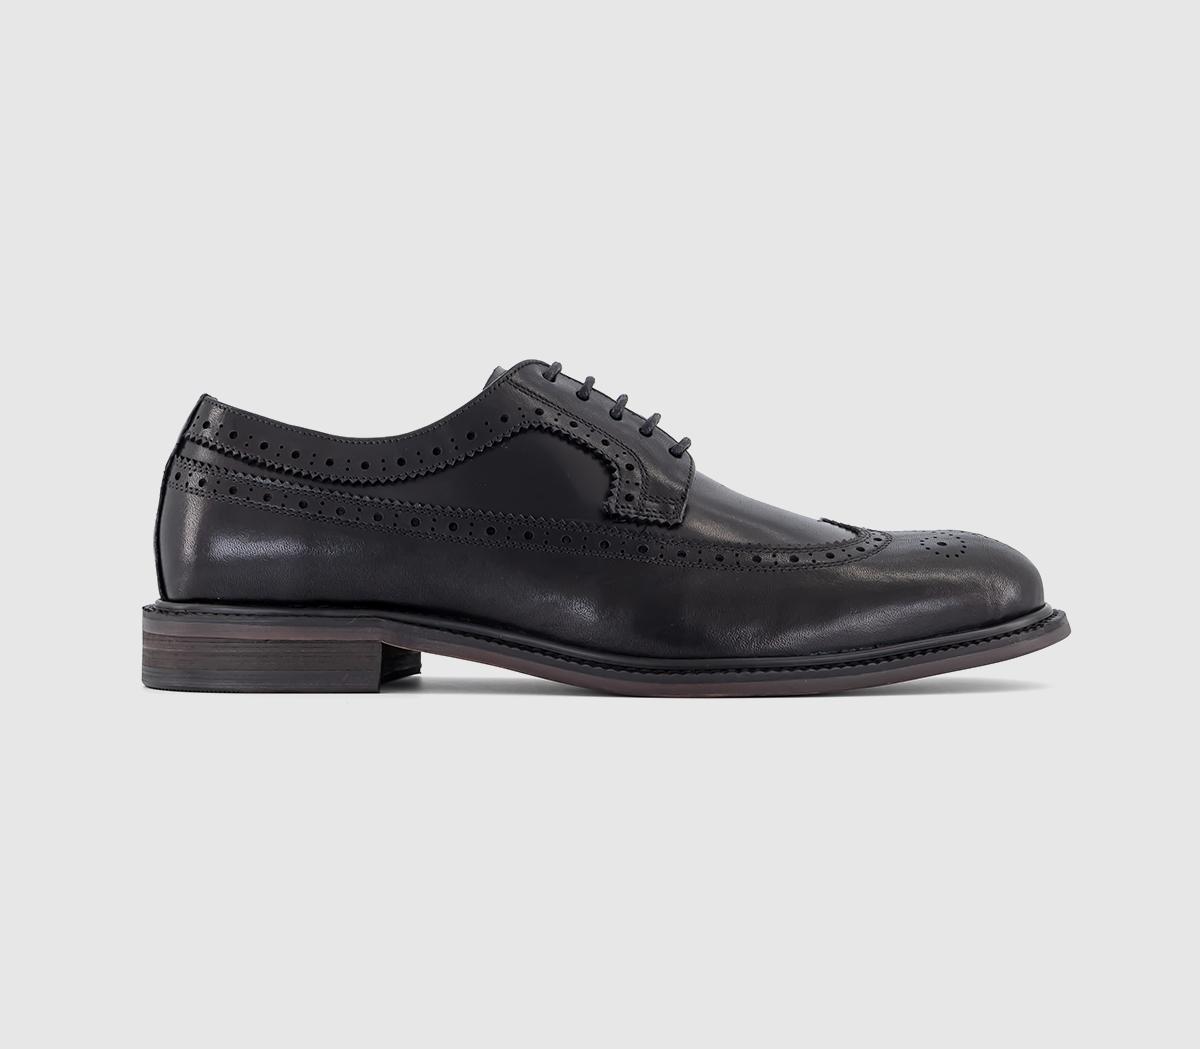 OFFICEMackay Longwing BroguesBlack Leather